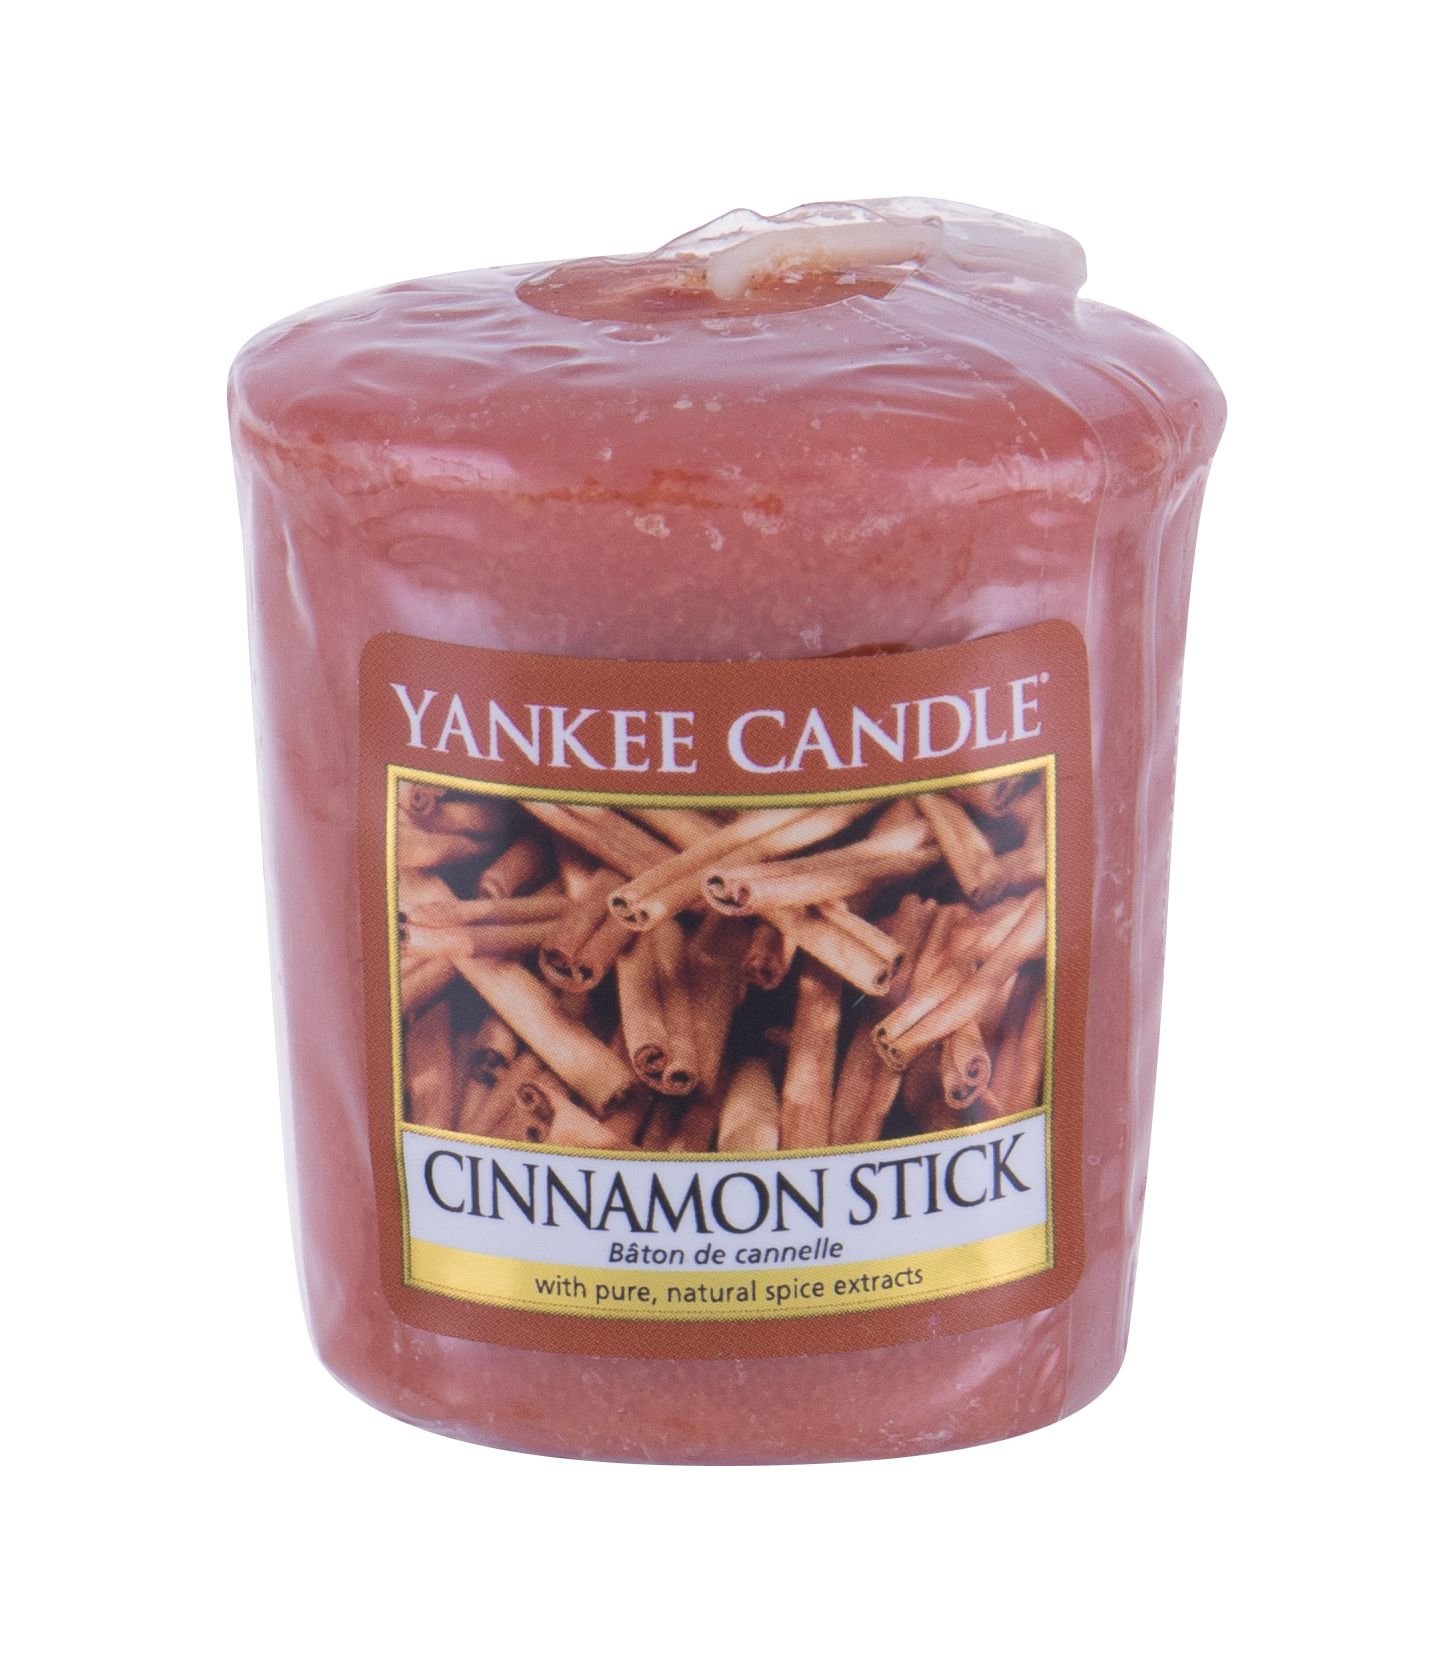 Yankee Candle Cinnamon Stick 49g Kvepalai Unisex Scented Candle